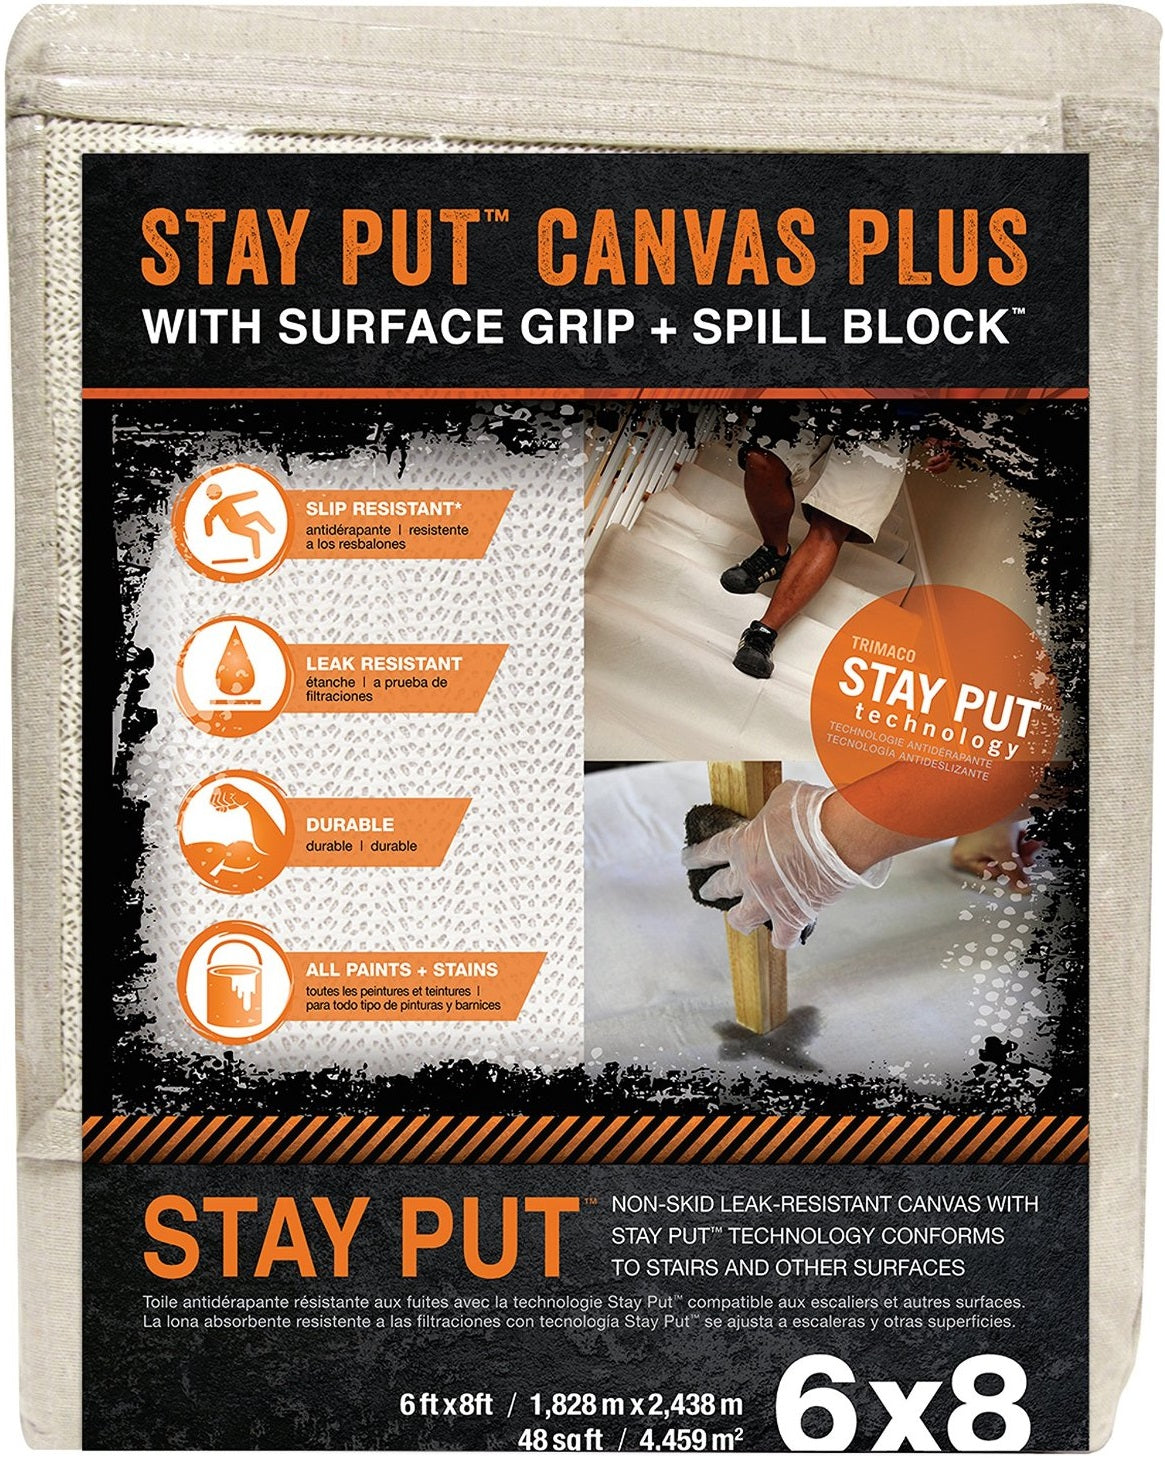 Trimaco 04329 Stay Put Canvas With Surface Grip & Spill Block, 6' x 8'